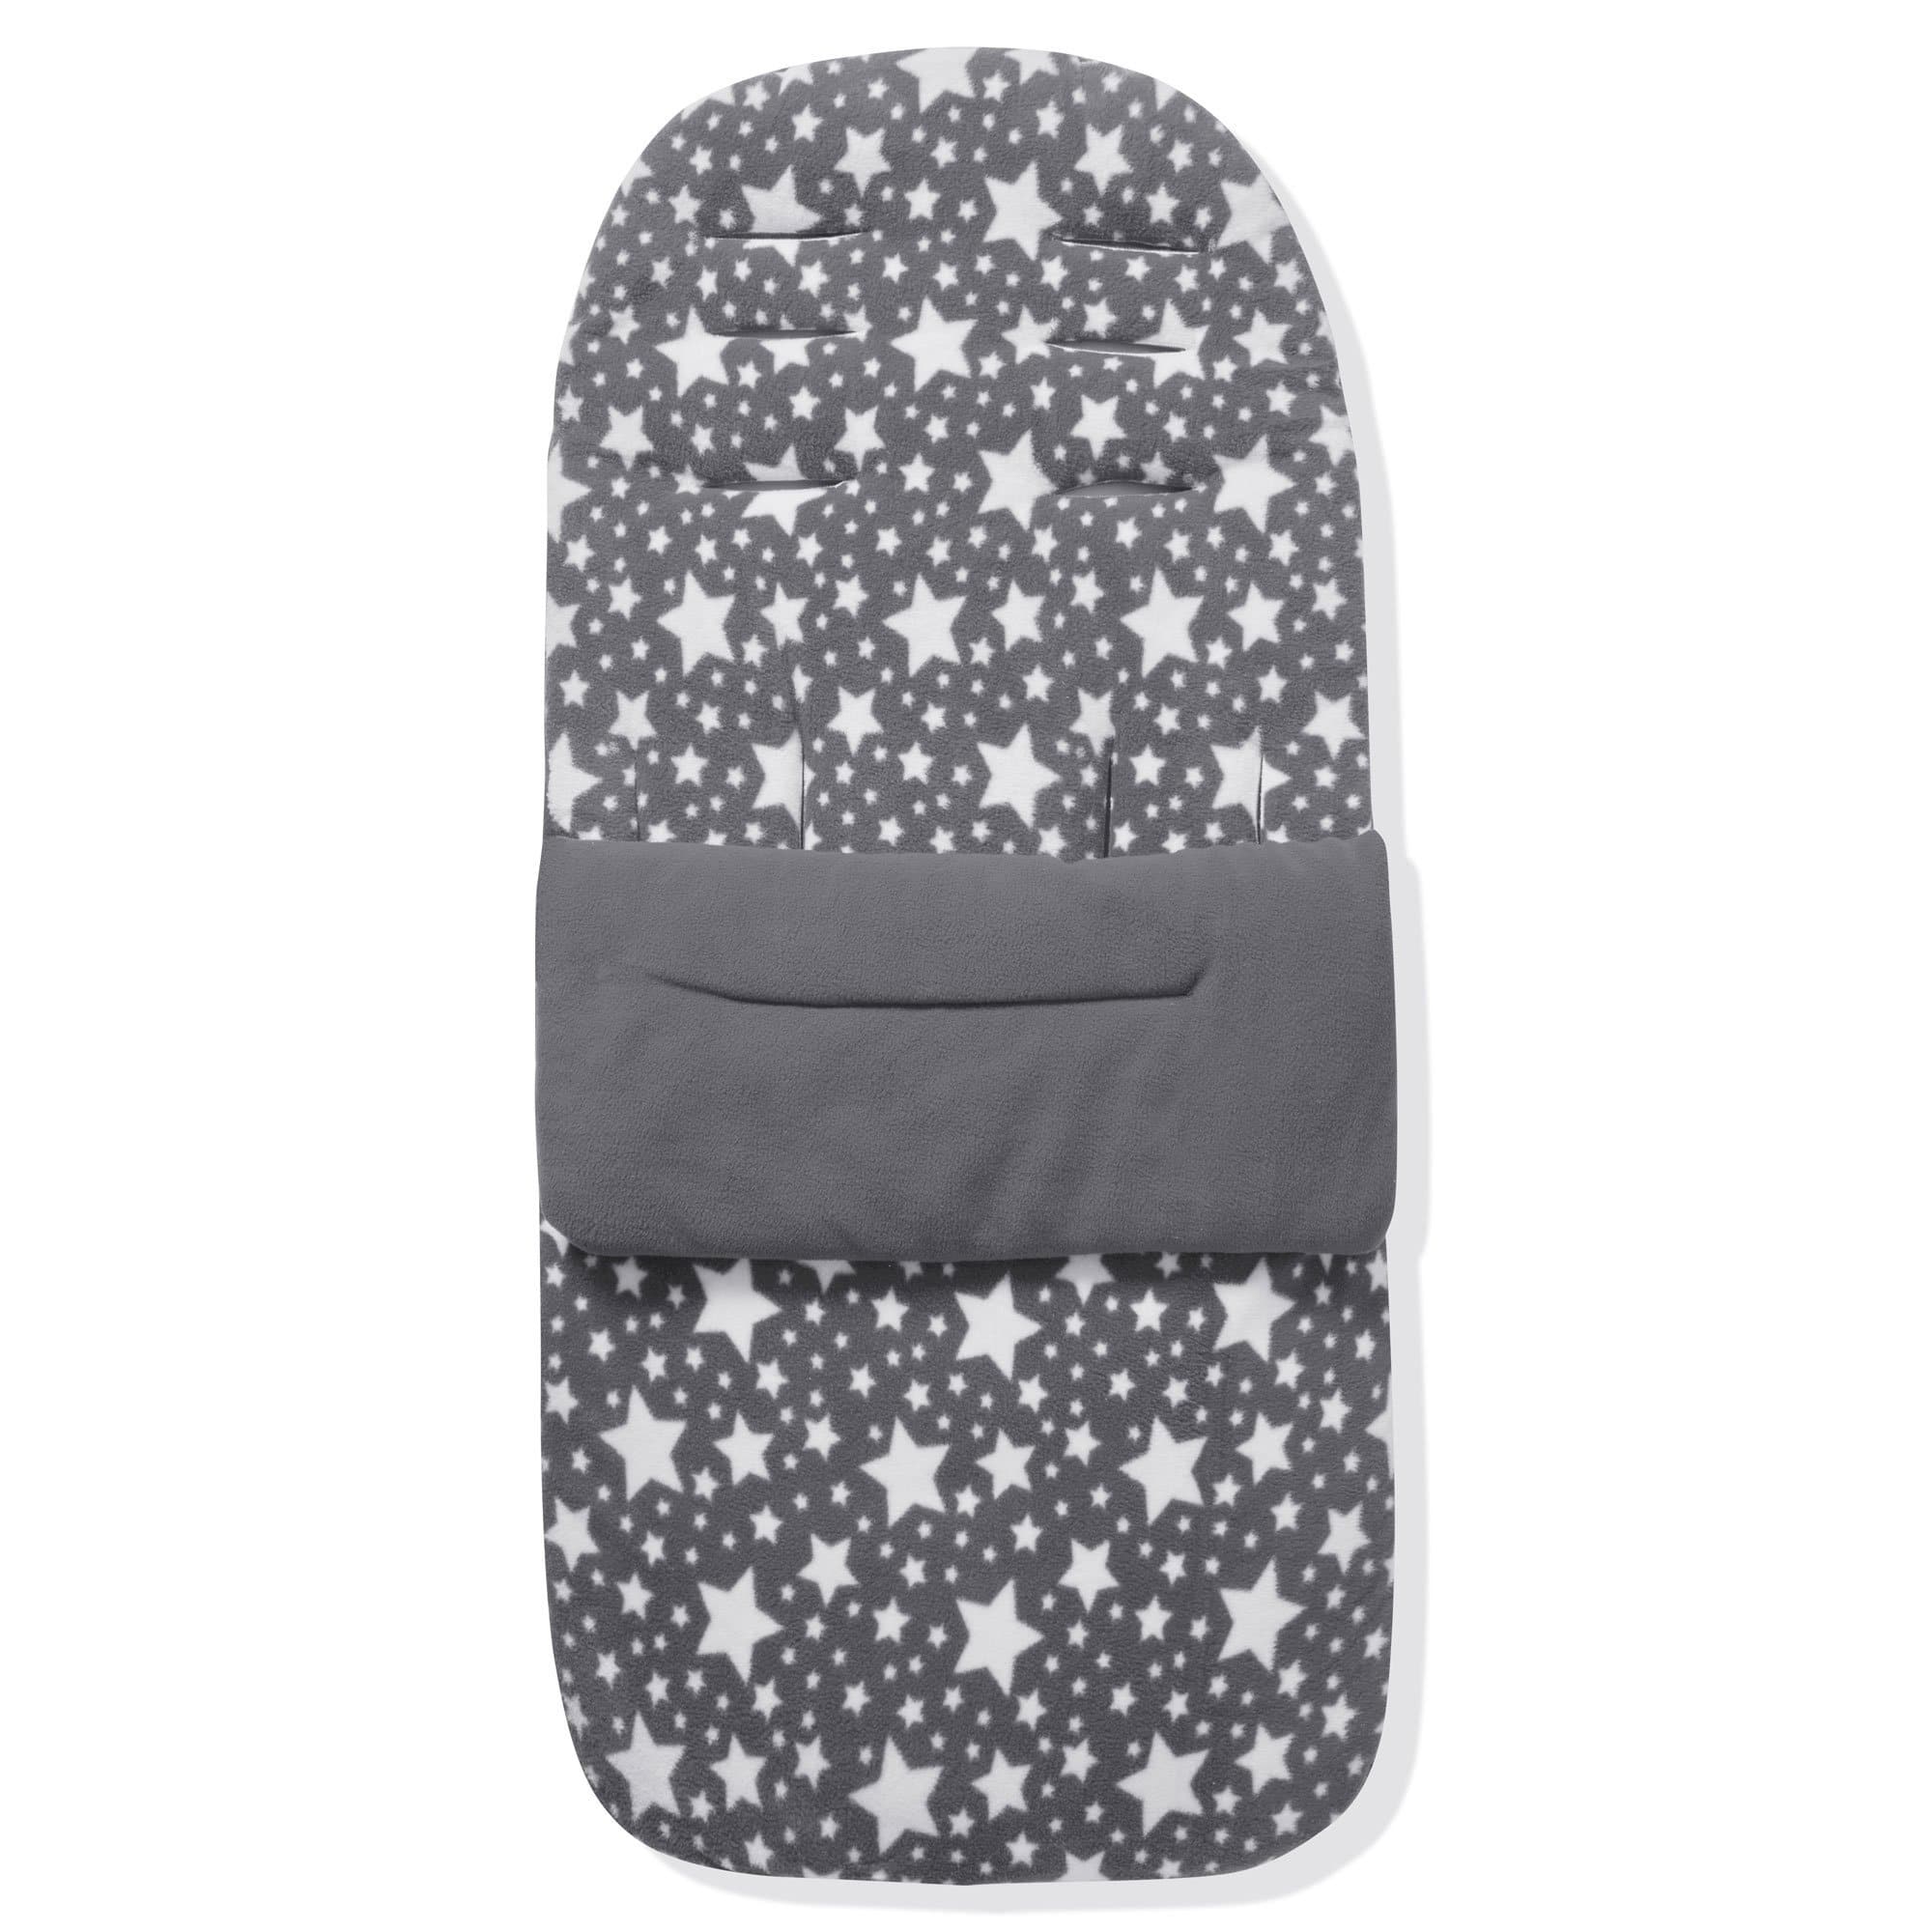 Fleece Footmuff / Cosy Toes Compatible with Seed - Grey Star / Fits All Models | For Your Little One